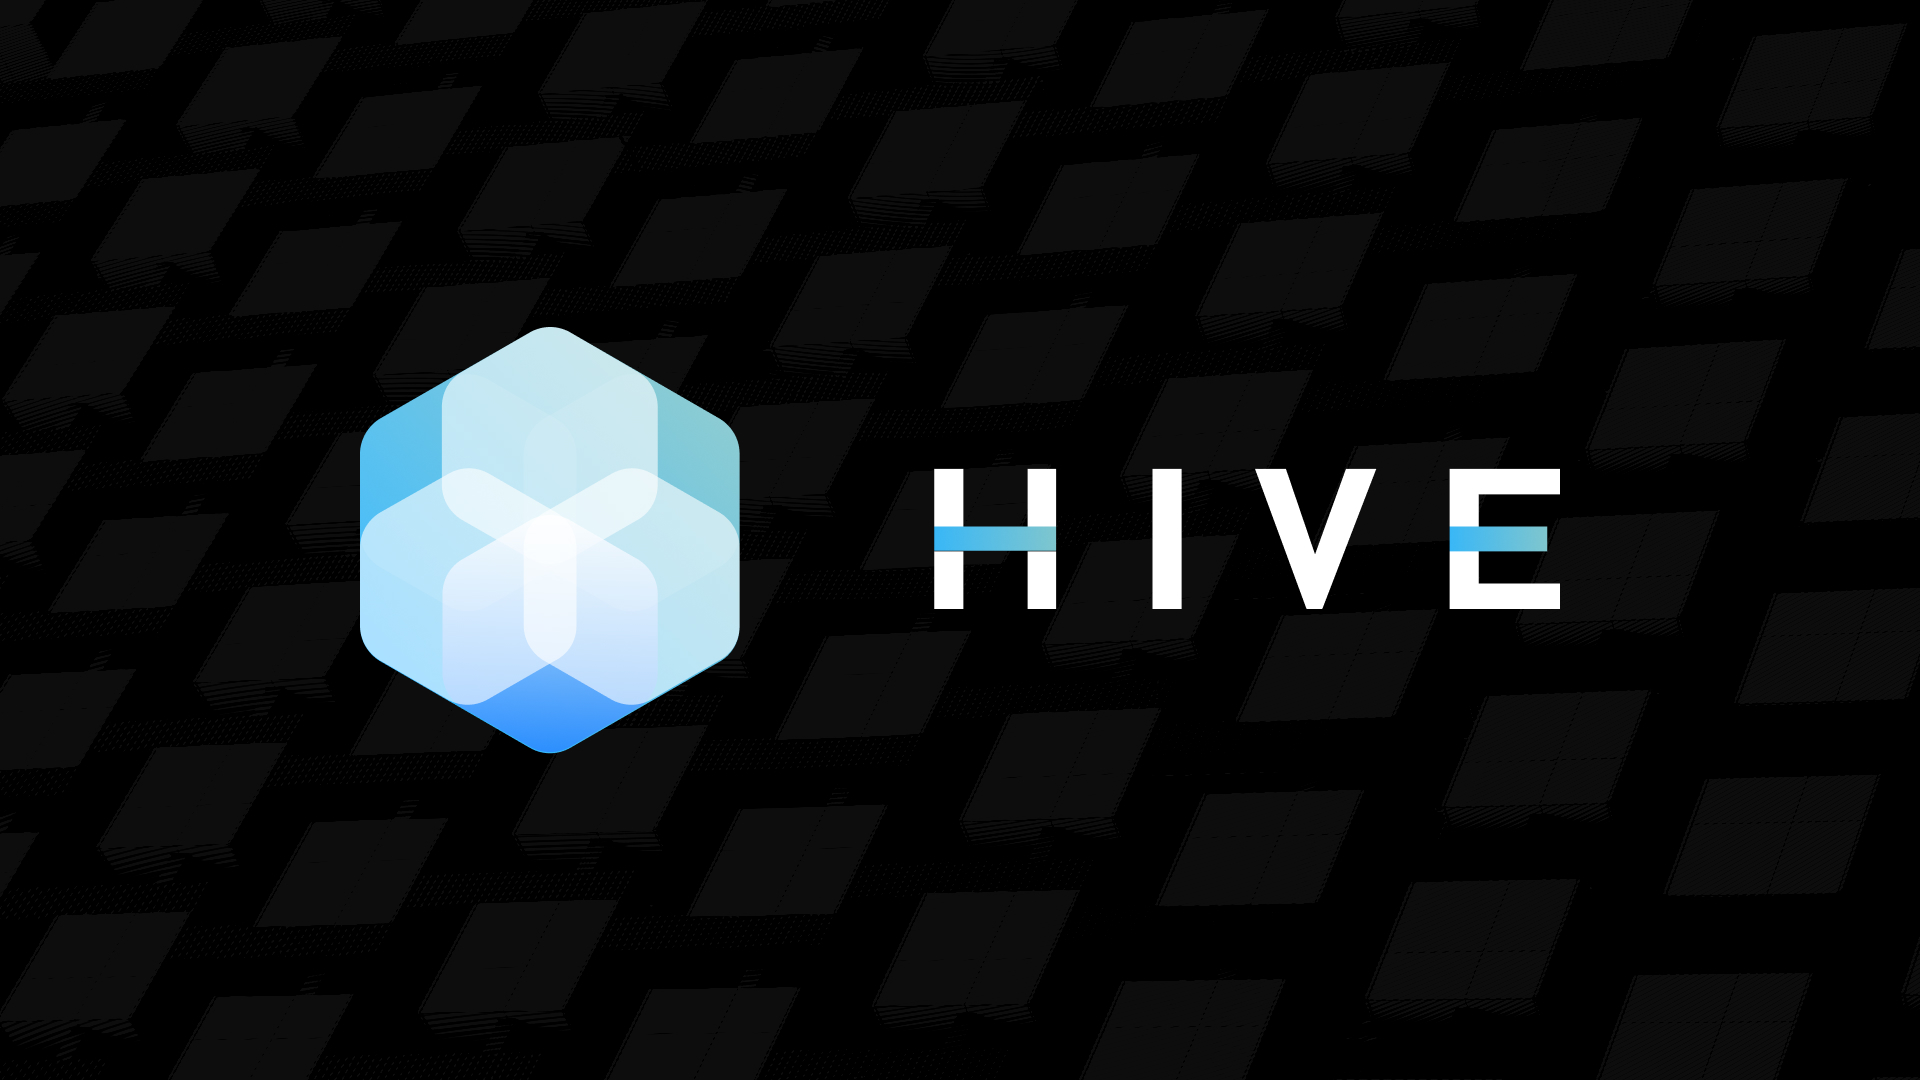 Crypto Mining Firm Hive Rebrands, Pivots To AI and Web3 $HIVE